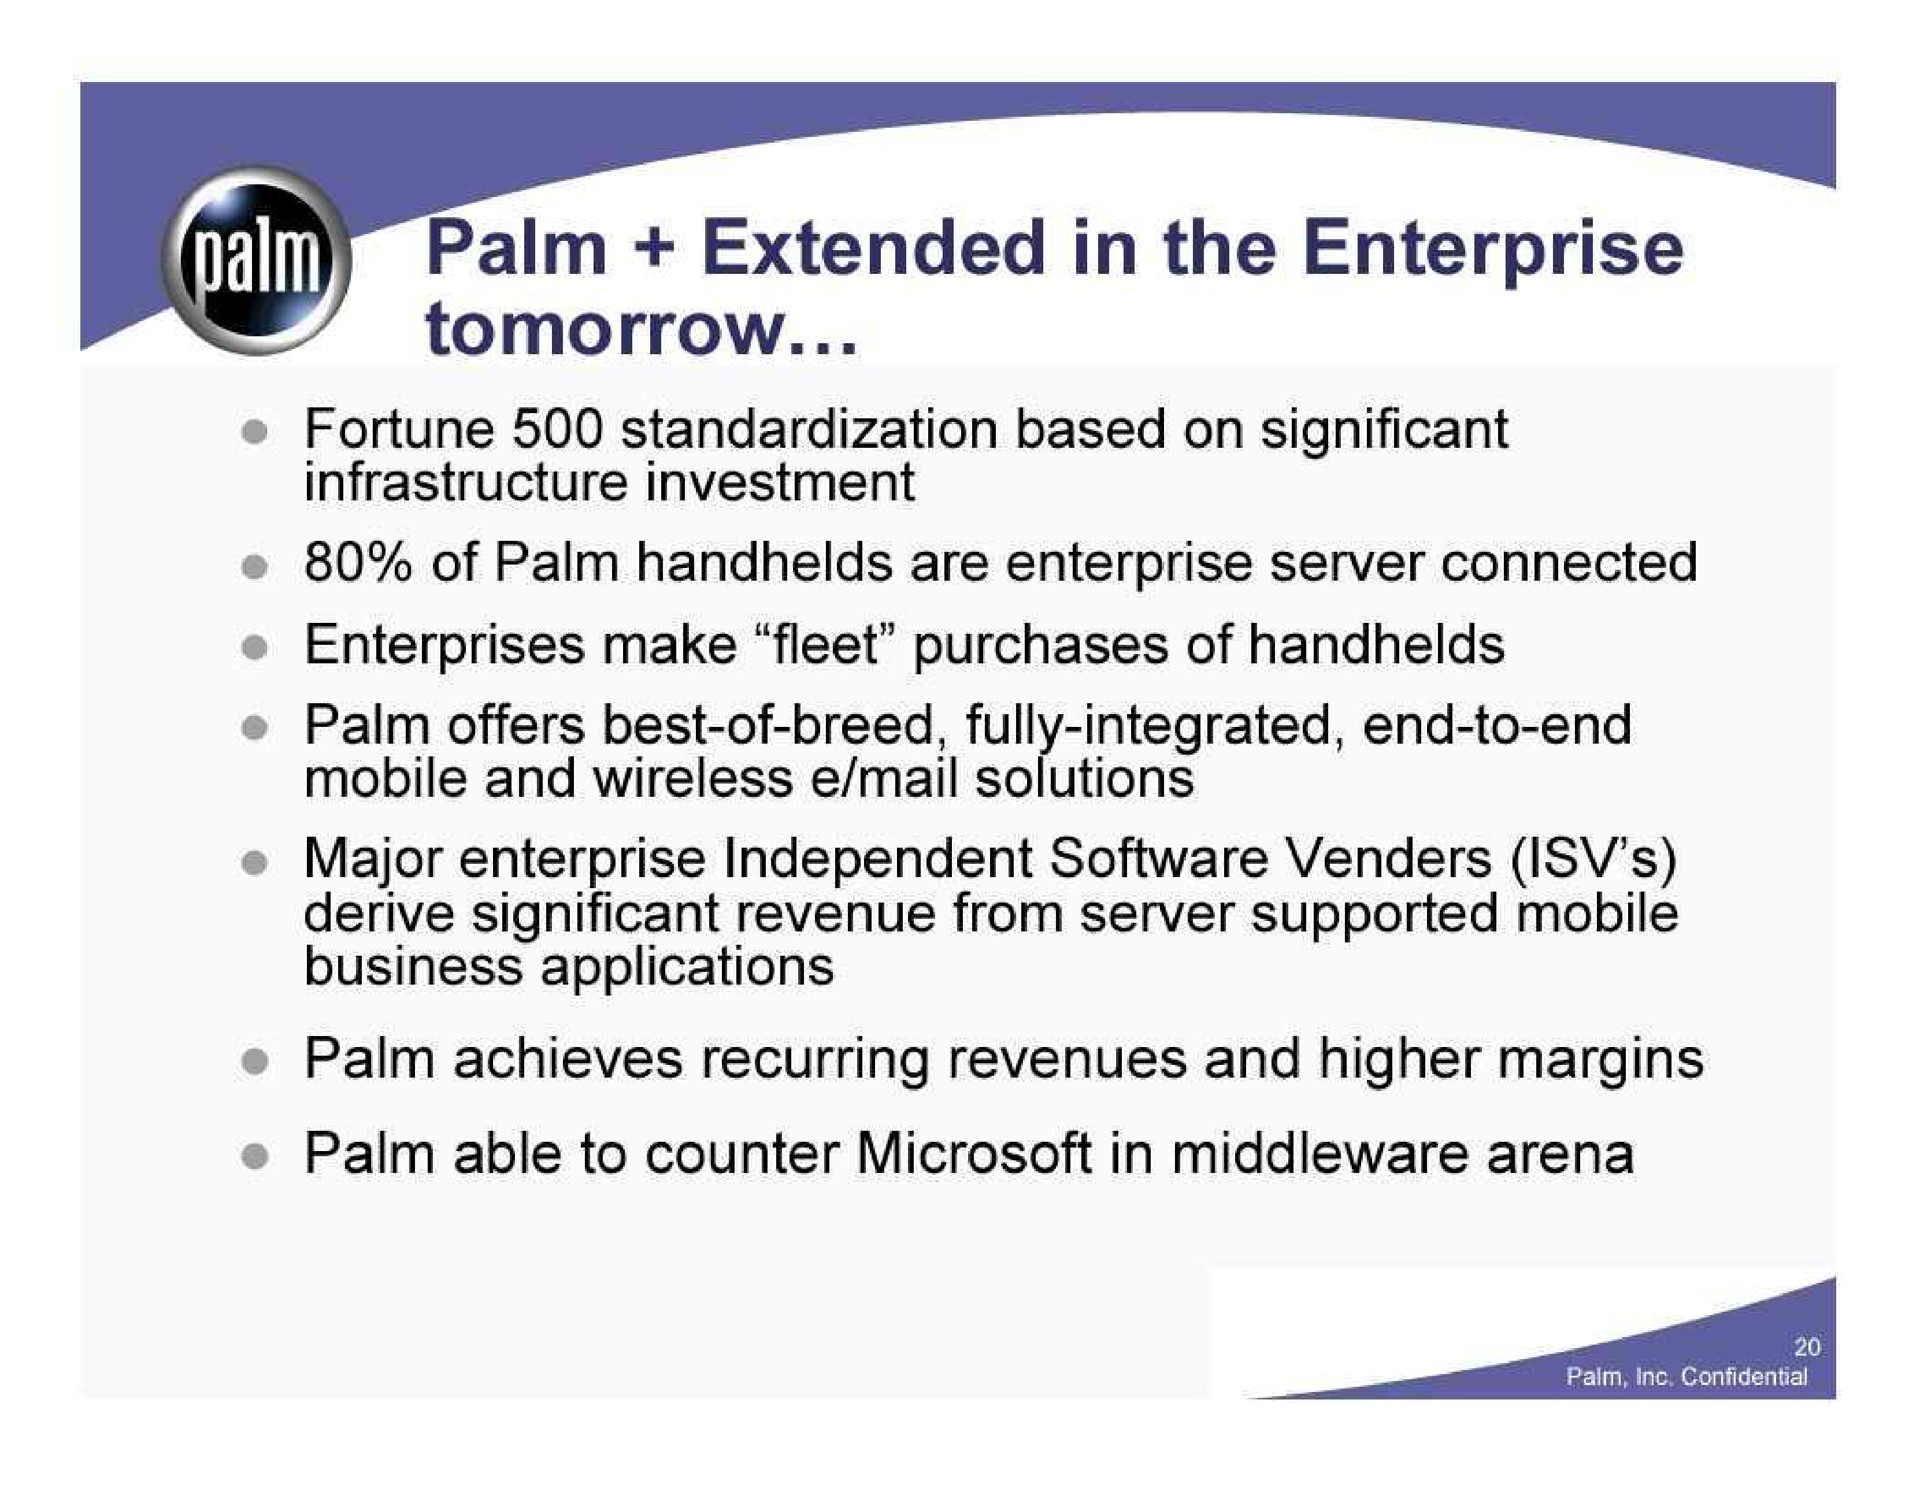 an palm extended in the enterprise | Palm Inc.